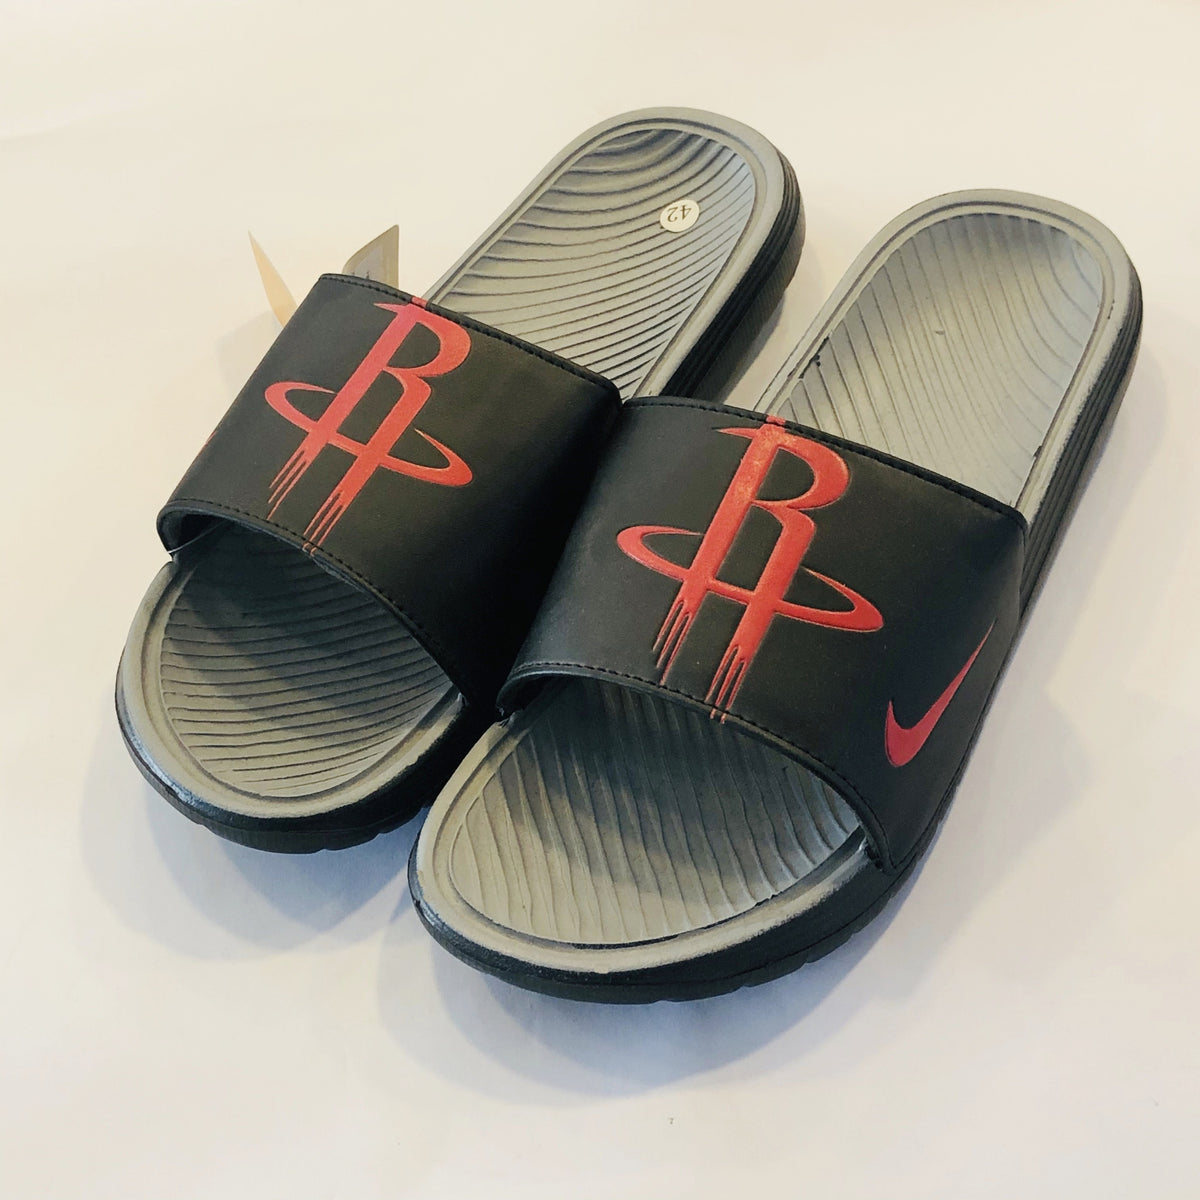 NK red grey -R slippers